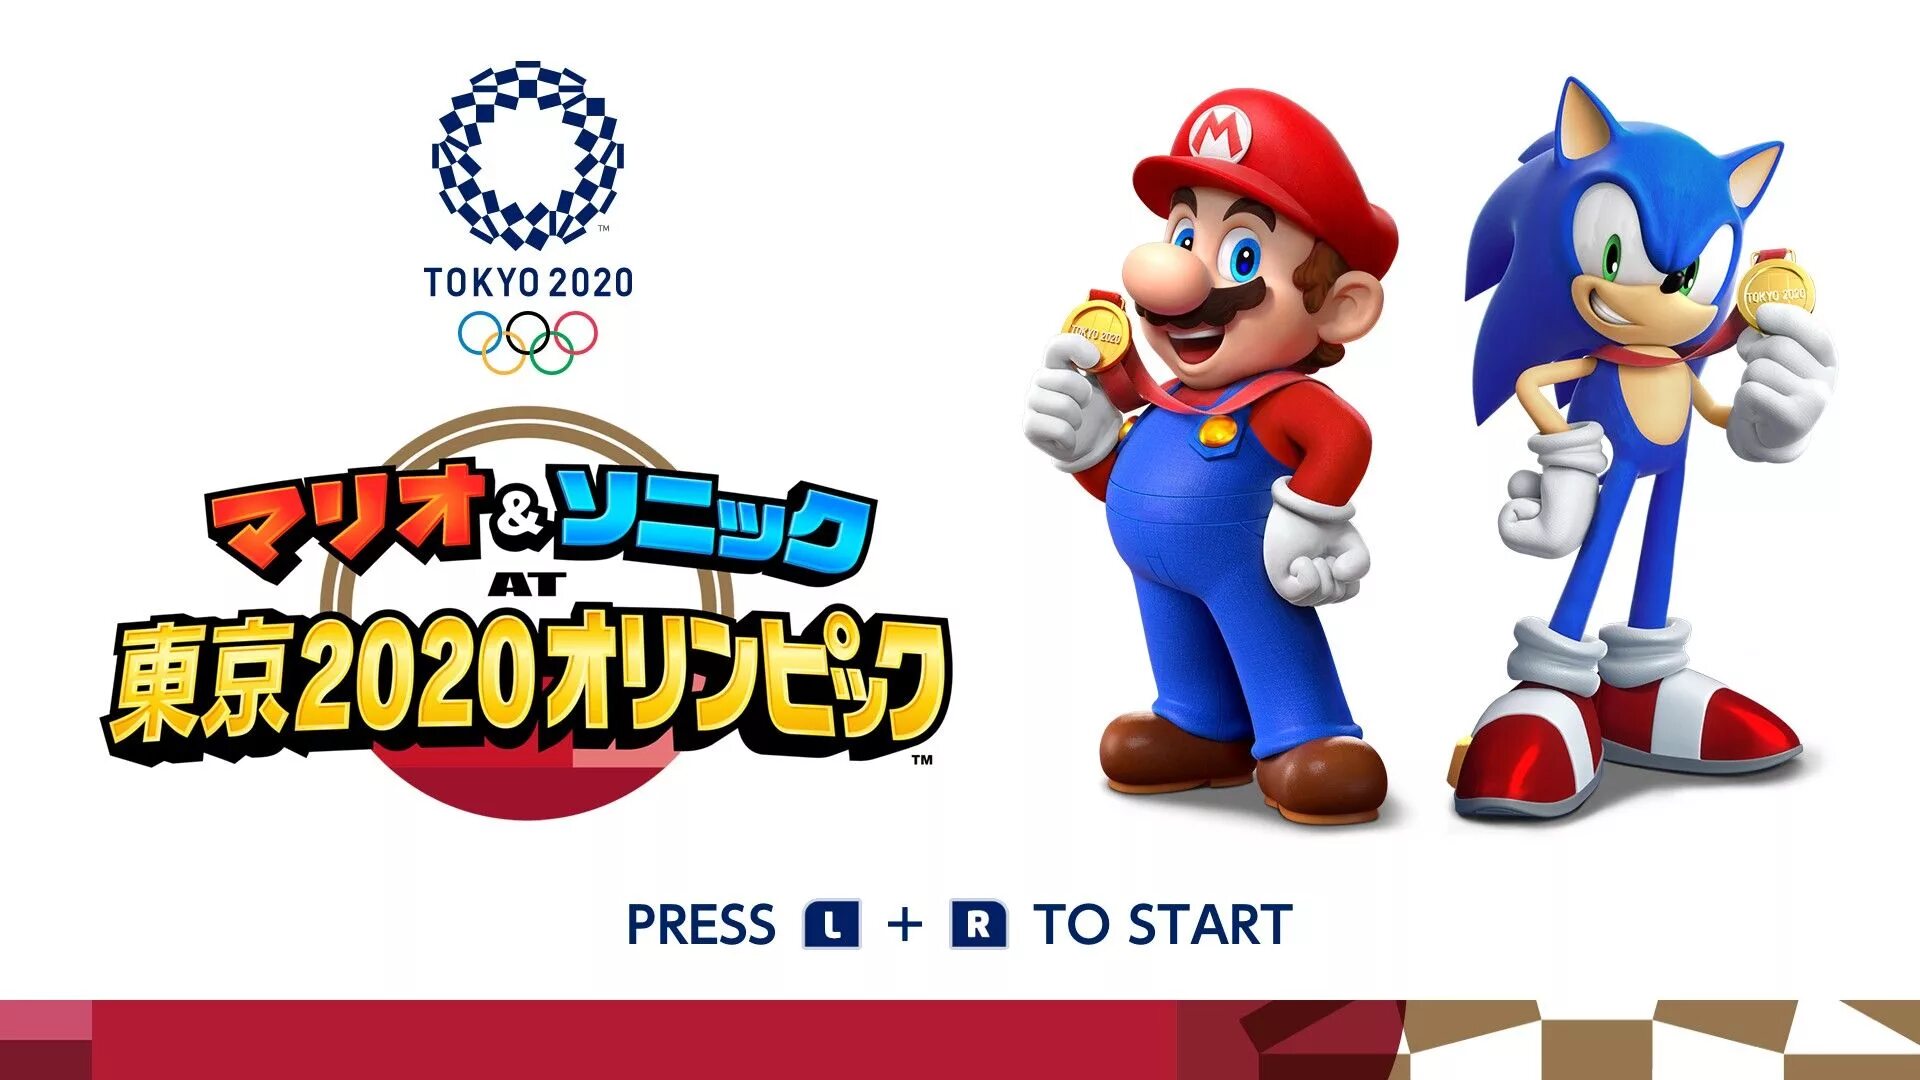 Mario and Sonic at the Olympic games Tokyo 2020. Марио и Соник на Олимпийских играх. Sonic Mario 2020. Mario & Sonic at the Olympic games.